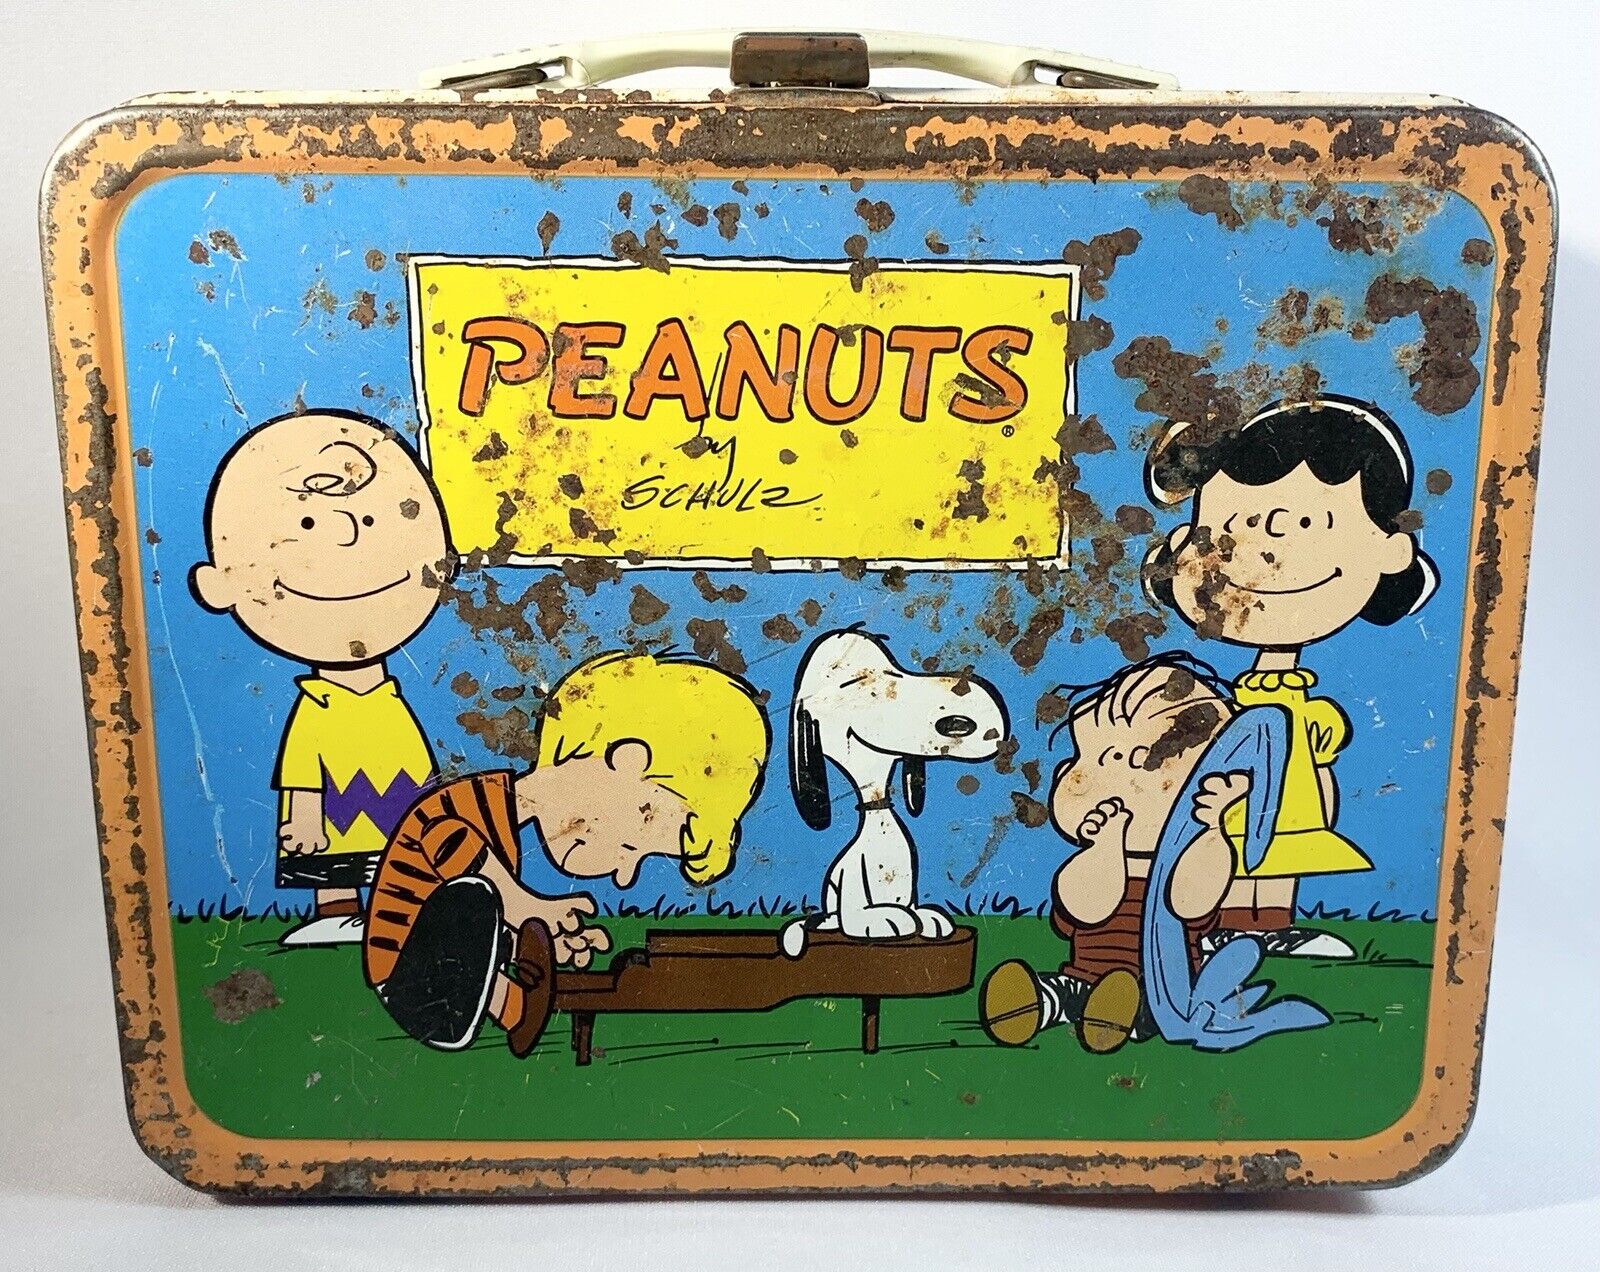 1959 PEANUTS by SCHULZ VINTAGE Lunch Box Tin Metal